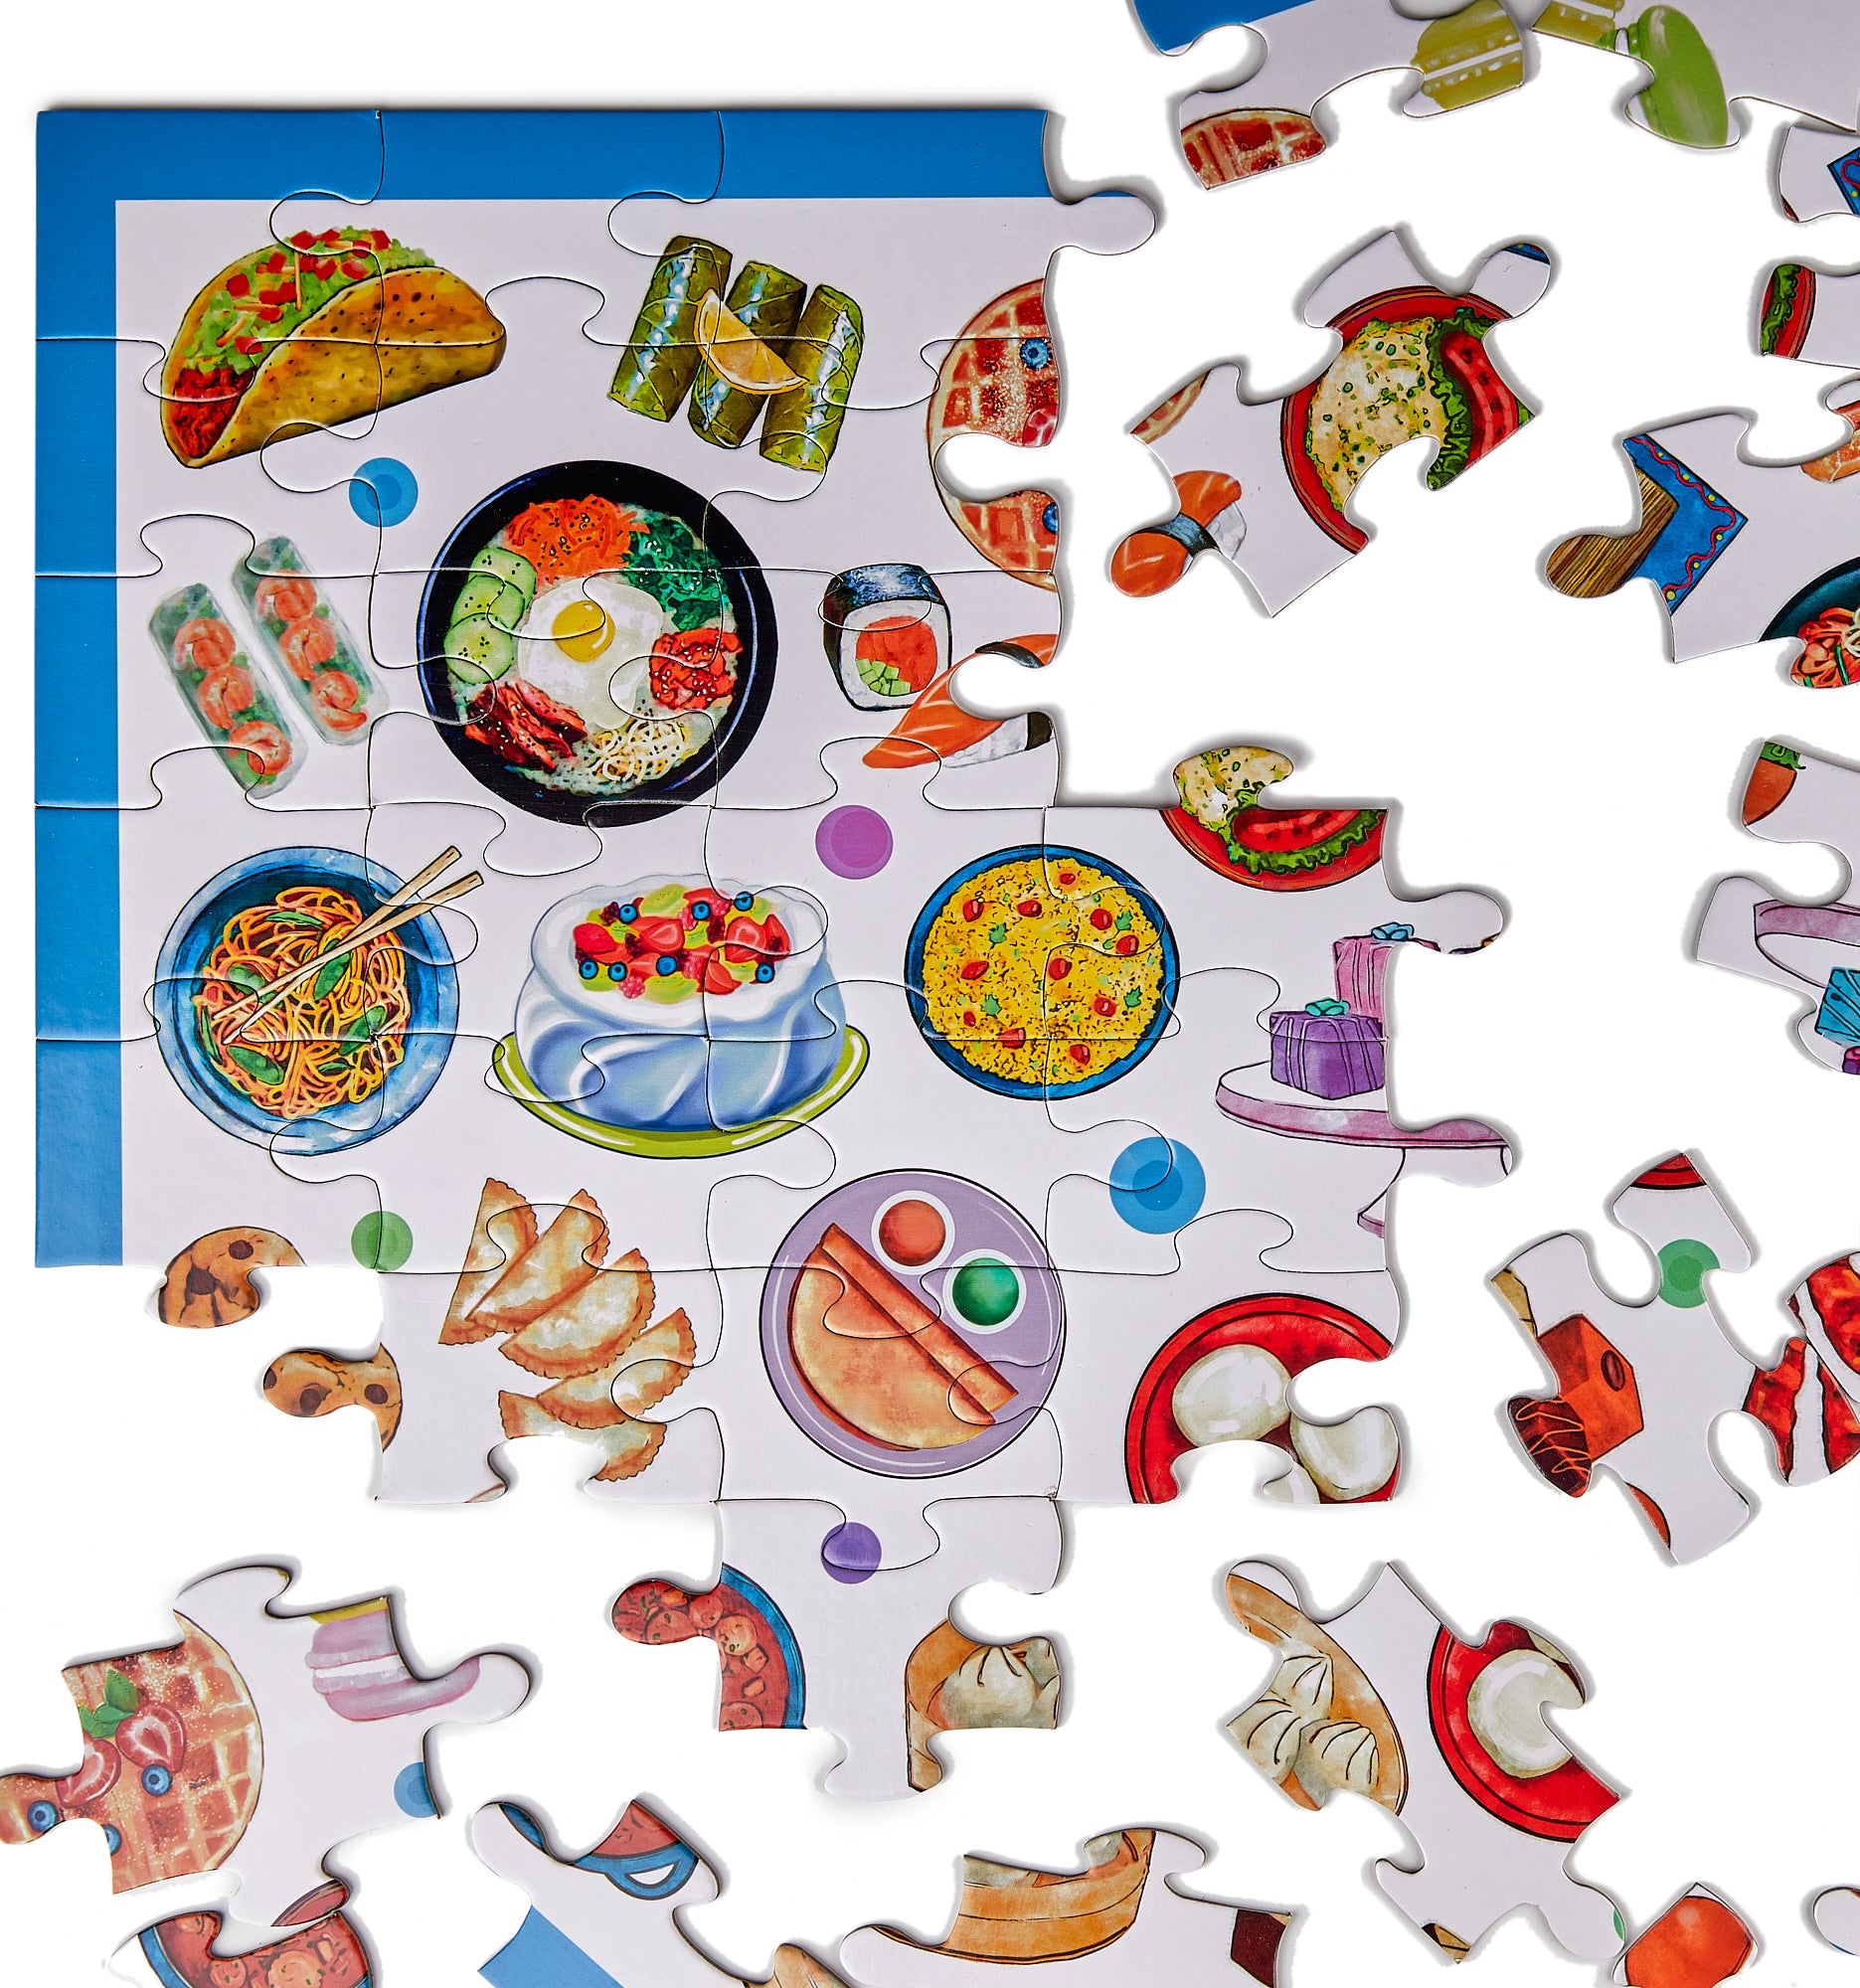 World Food Puzzle - 64 Piece Jigsaw Puzzle - Explore Dishes From Aroun